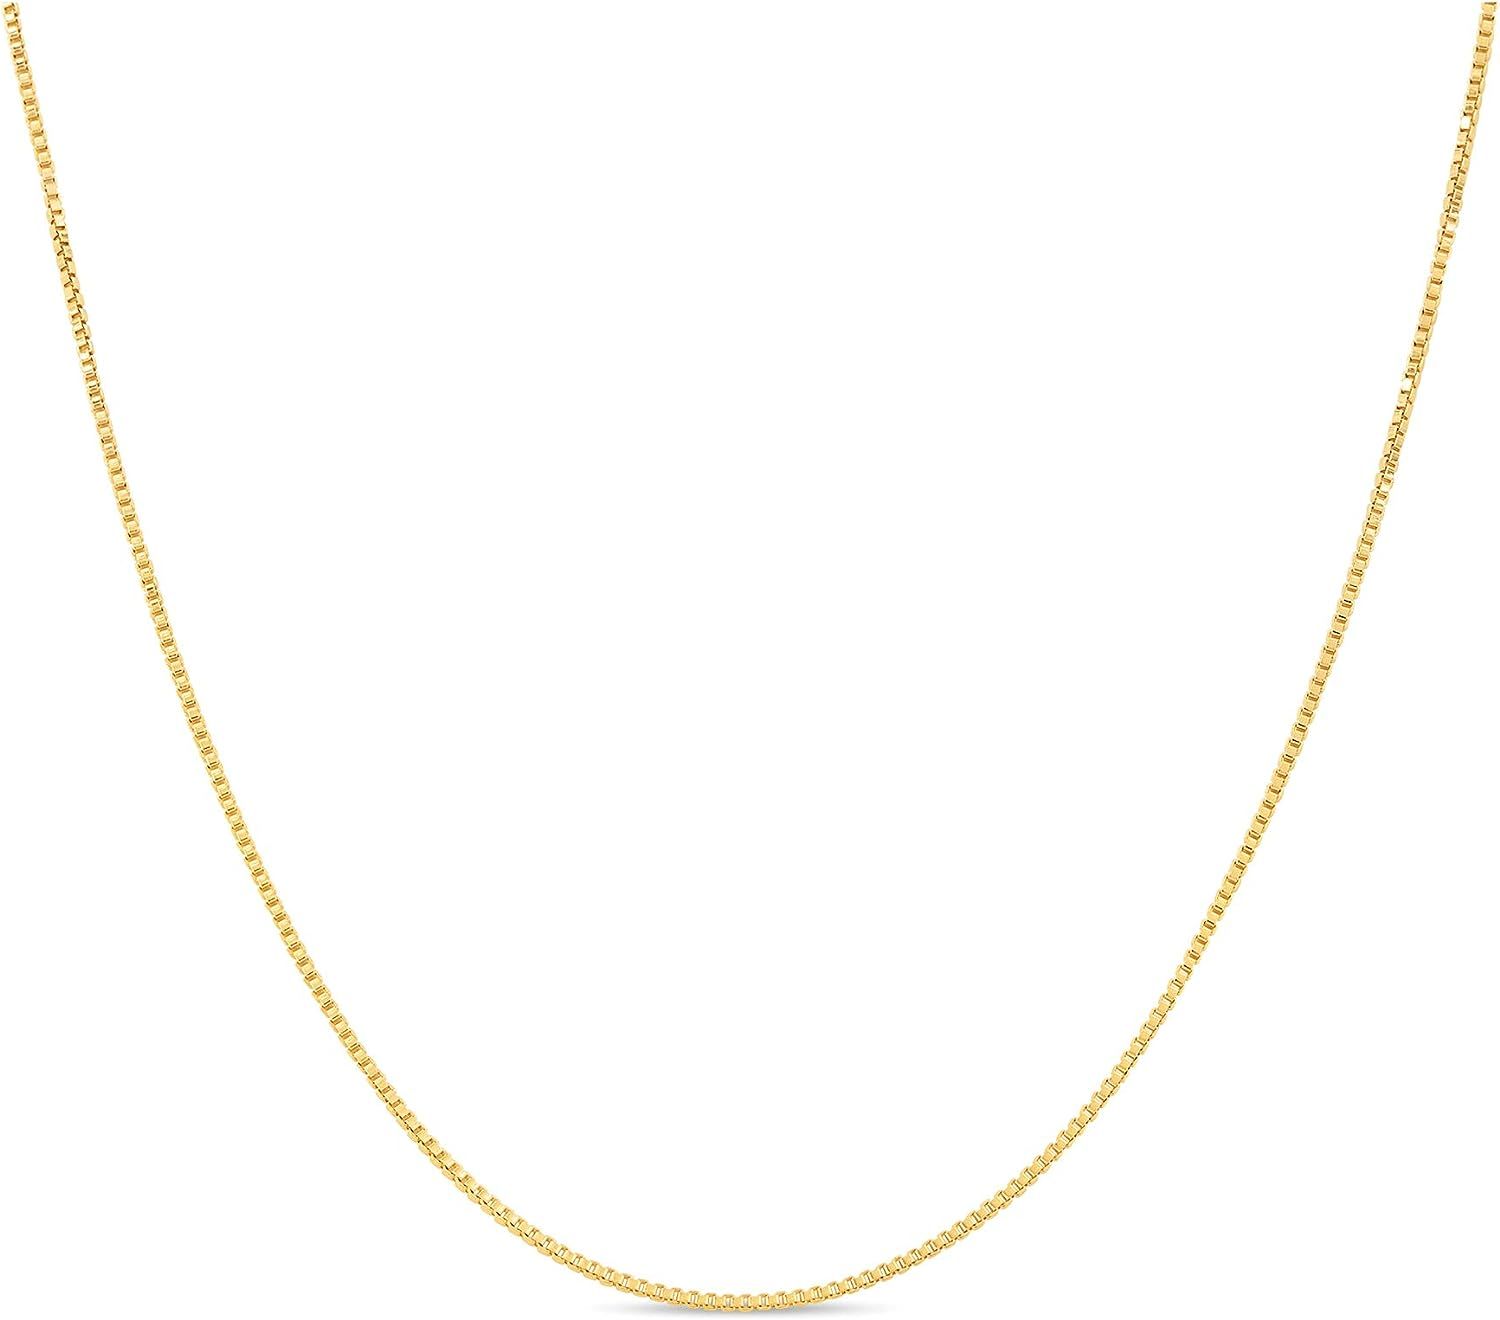 KEZEF 18k Gold Over Sterling Silver 1mm Box Chain Necklace Made in Italy 14 Inch | Amazon (US)